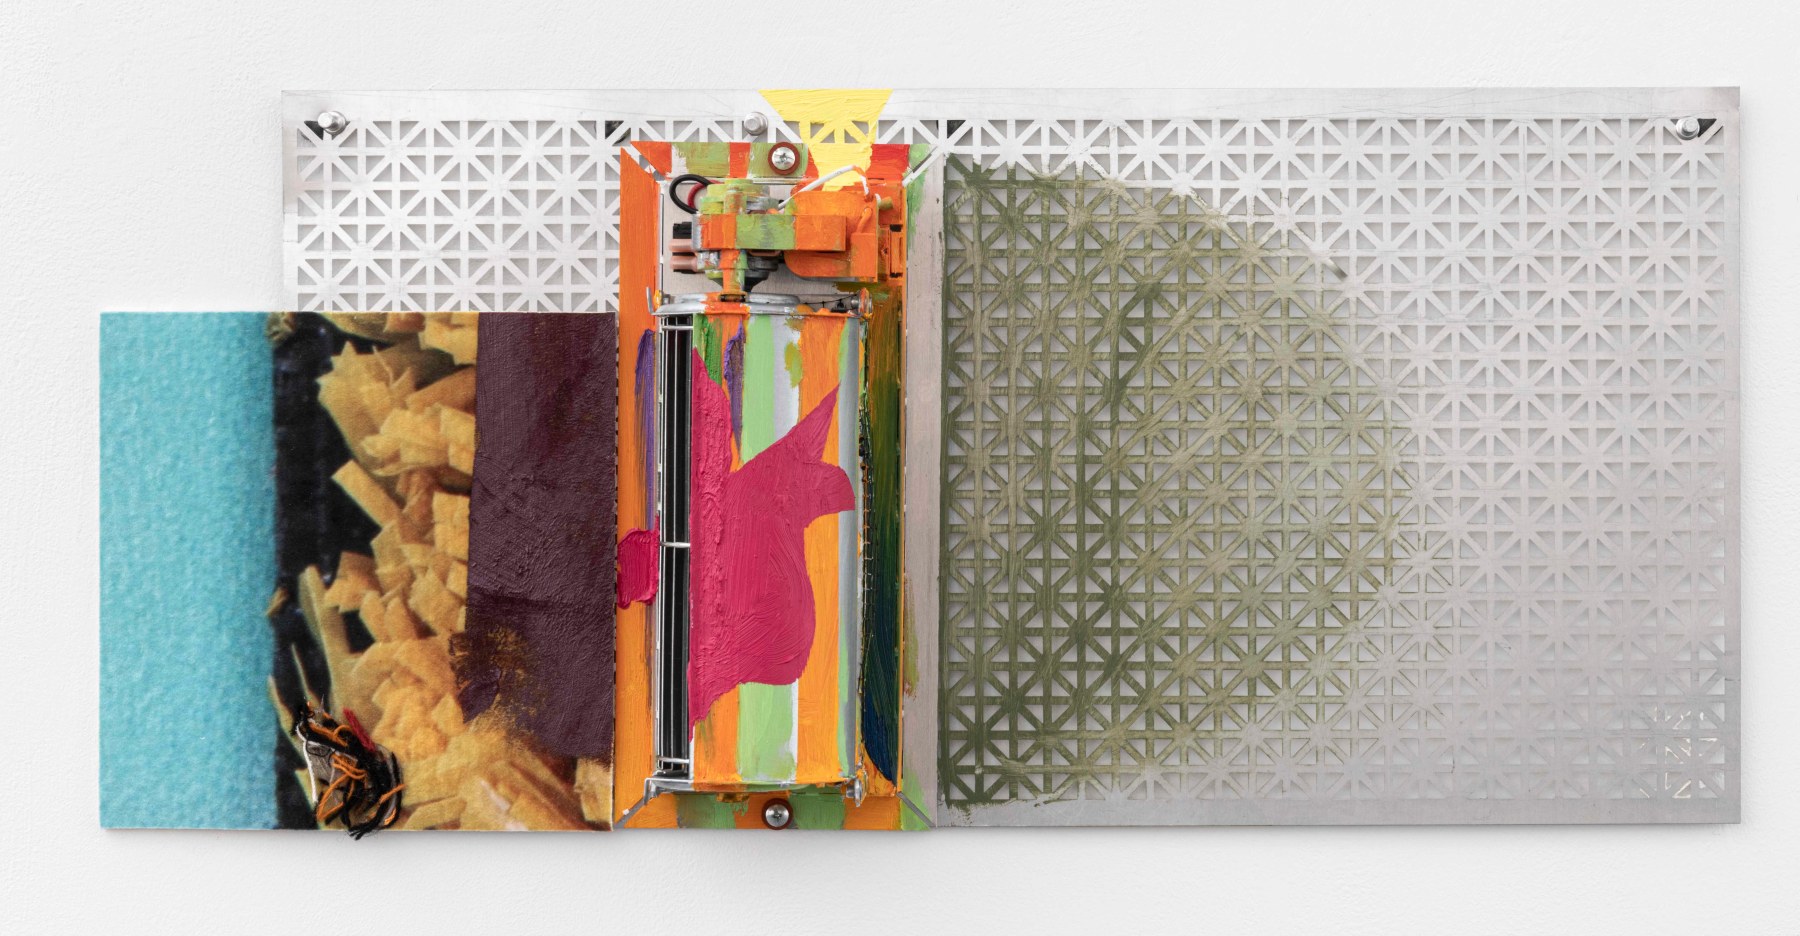 JESSICA STOCKHOLDER
Through the Rain
[JS 790]
2020
Perforated metal plate, heating vent fan, photo printed on velvet carpet, glue, oil paint, hardware and aluminum push pins
12 1/2 by 27 1/2 by 5 in.&amp;nbsp; 31.8 by 69.9 by 12.7 cm.
MI&amp;amp;N 16890

$20,000